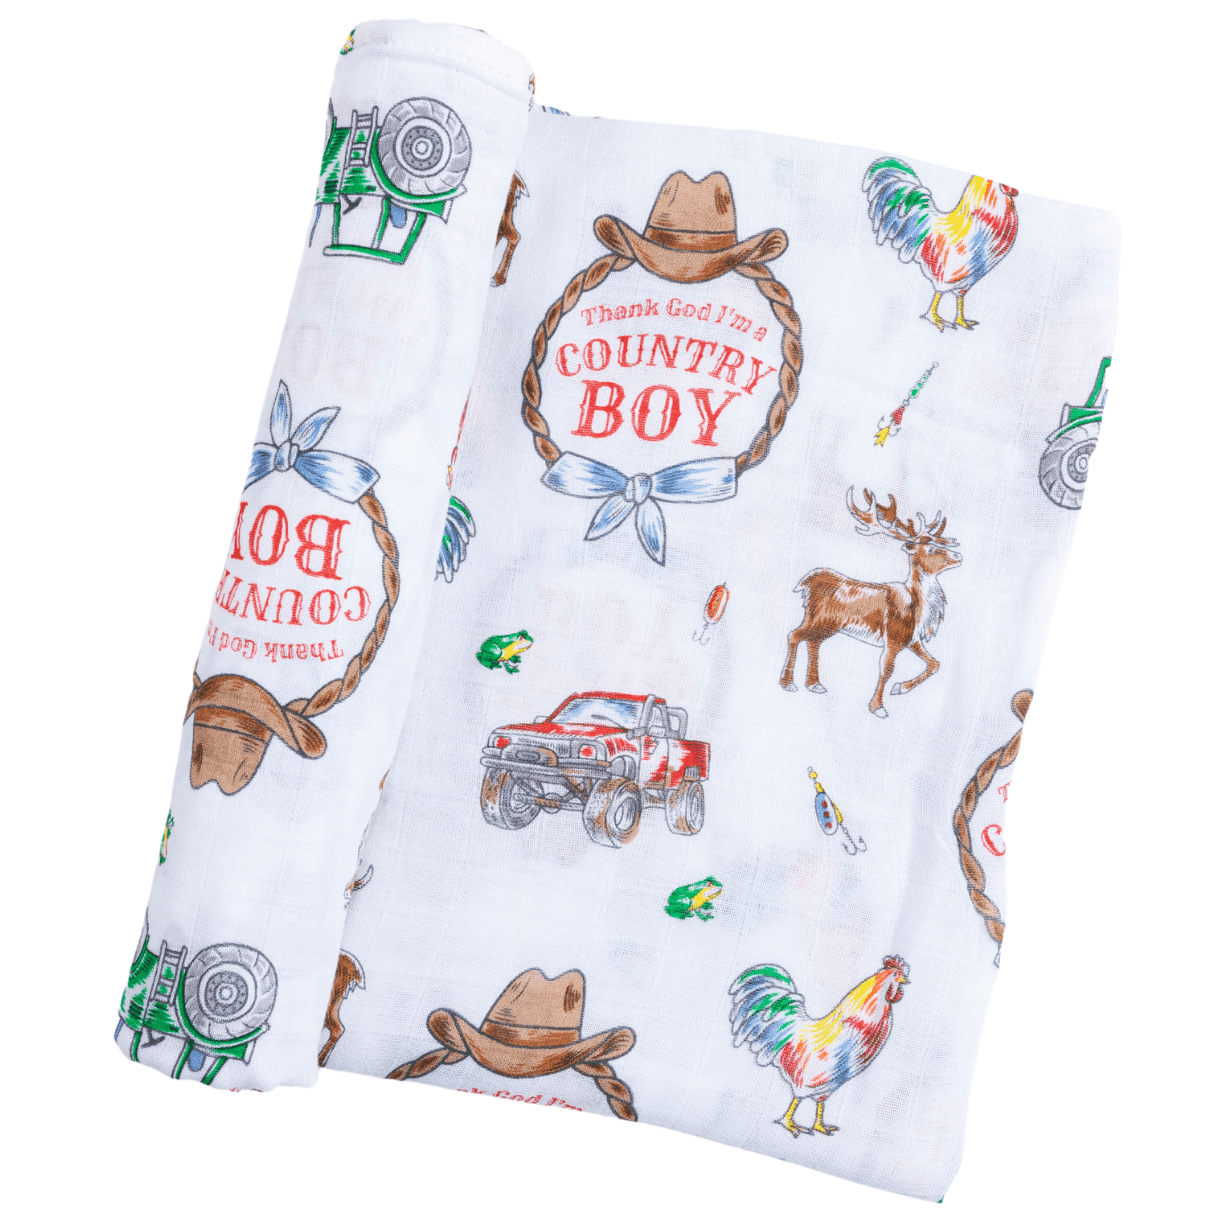 Country Boy muslin swaddle blanket with a playful farm animal print, featuring cows, pigs, and tractors.